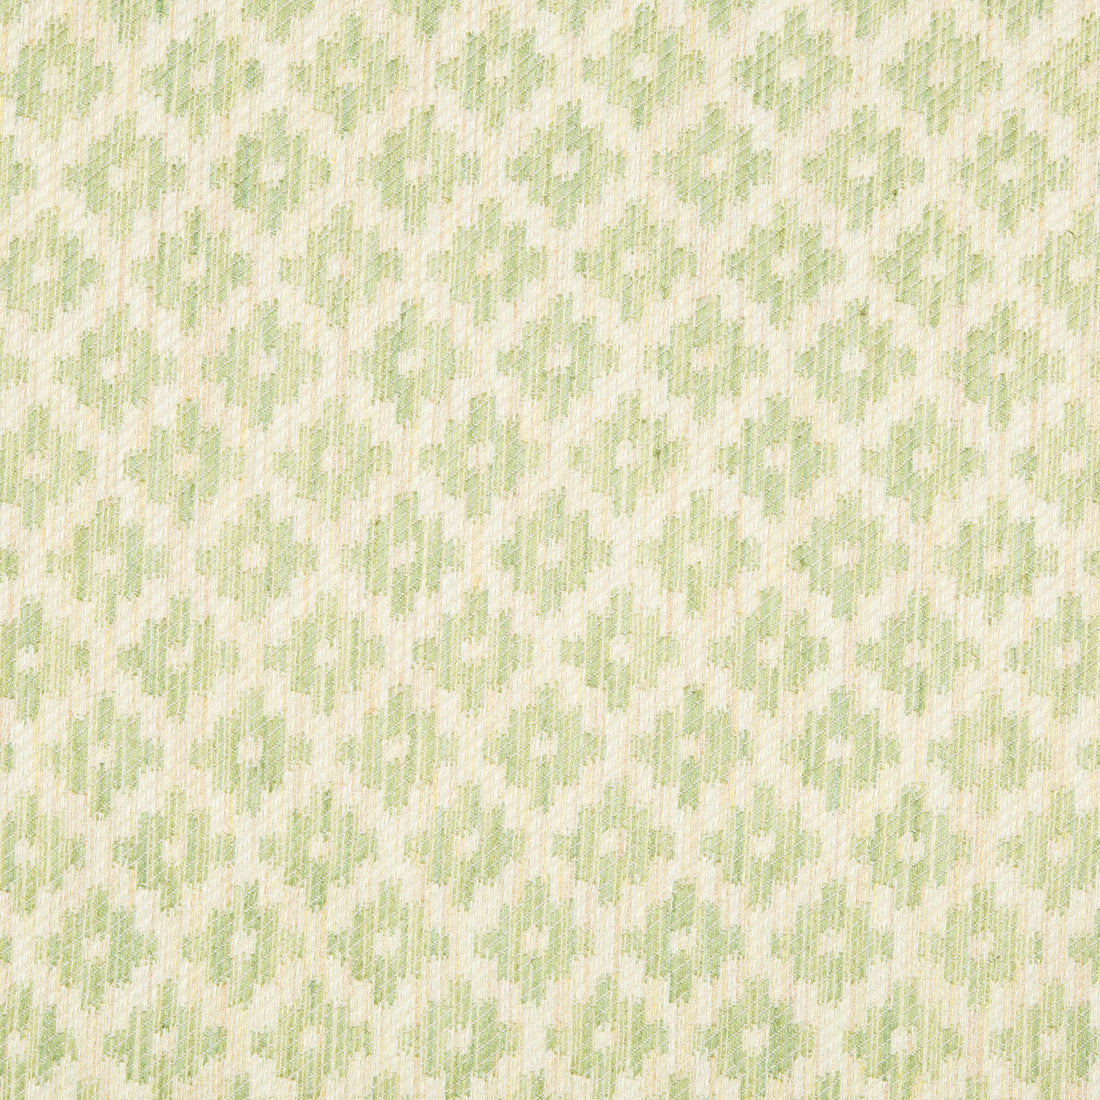 Baronet Strie fabric in celery color - pattern 8017142.3.0 - by Brunschwig &amp; Fils in the Baronet collection